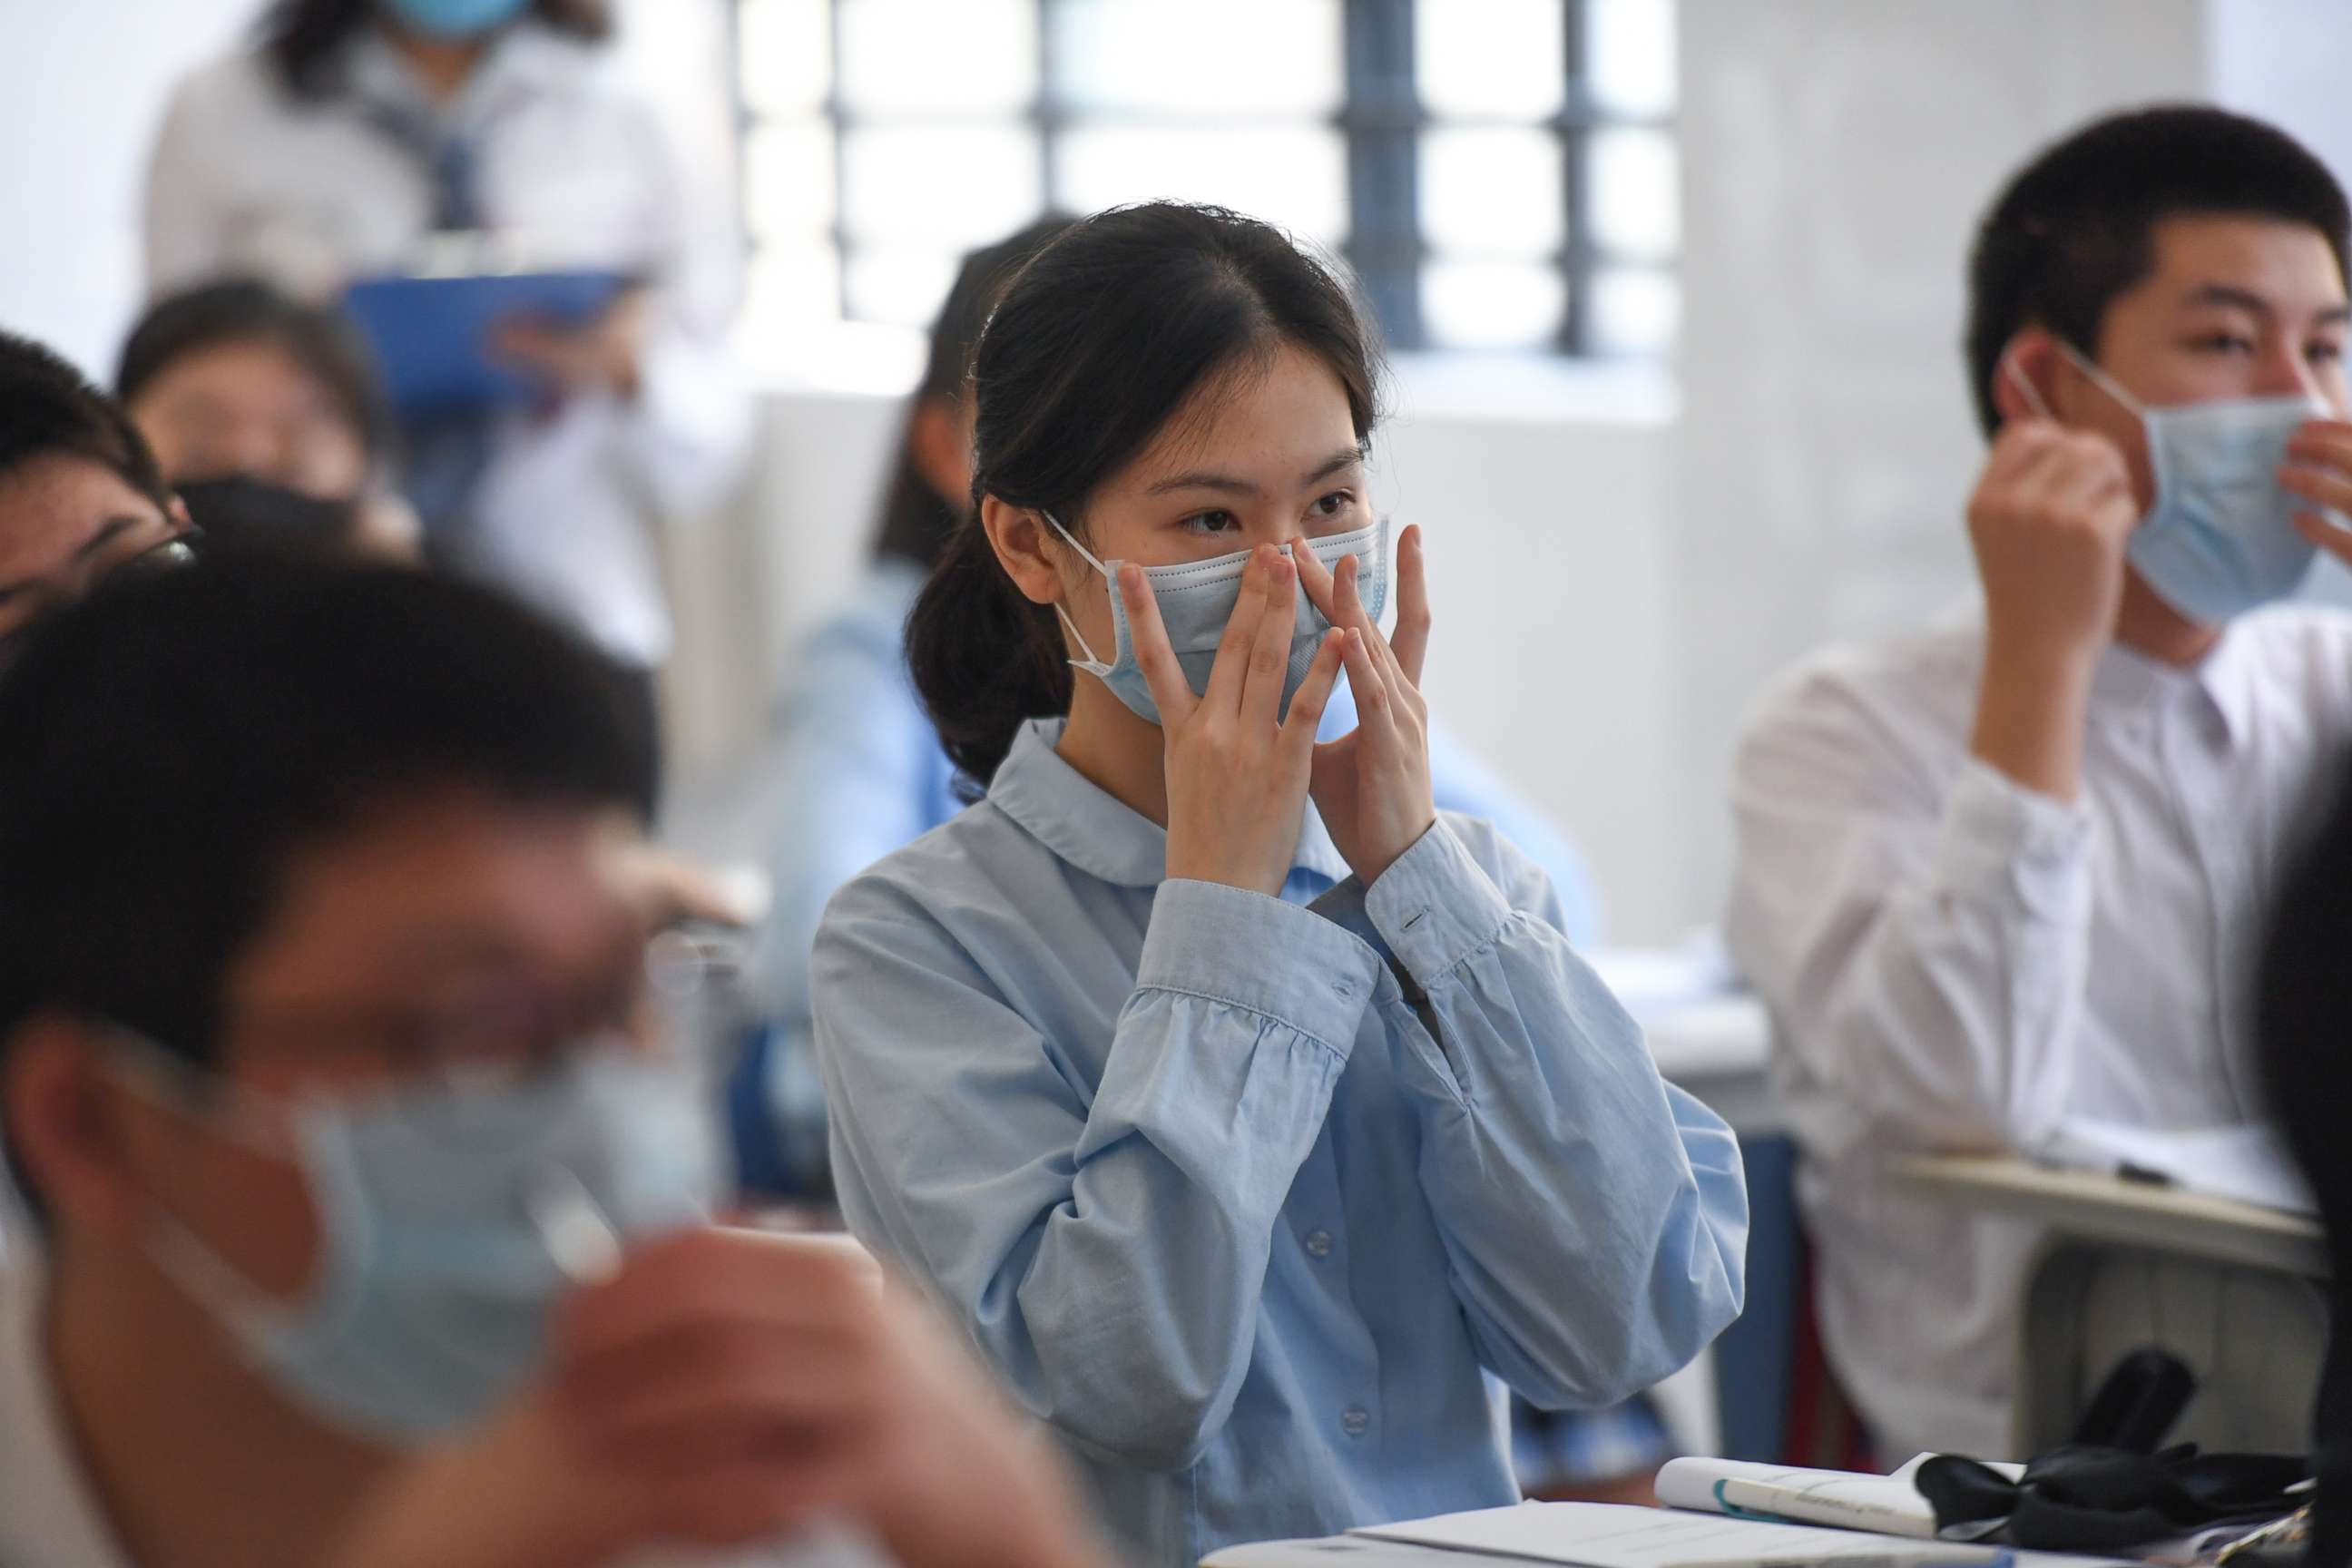 PHOTO: Ninth-grade students learn how to properly wear a face mask at Shenzhen Foreign Languages School in Shenzhen, China, April 27, 2020.